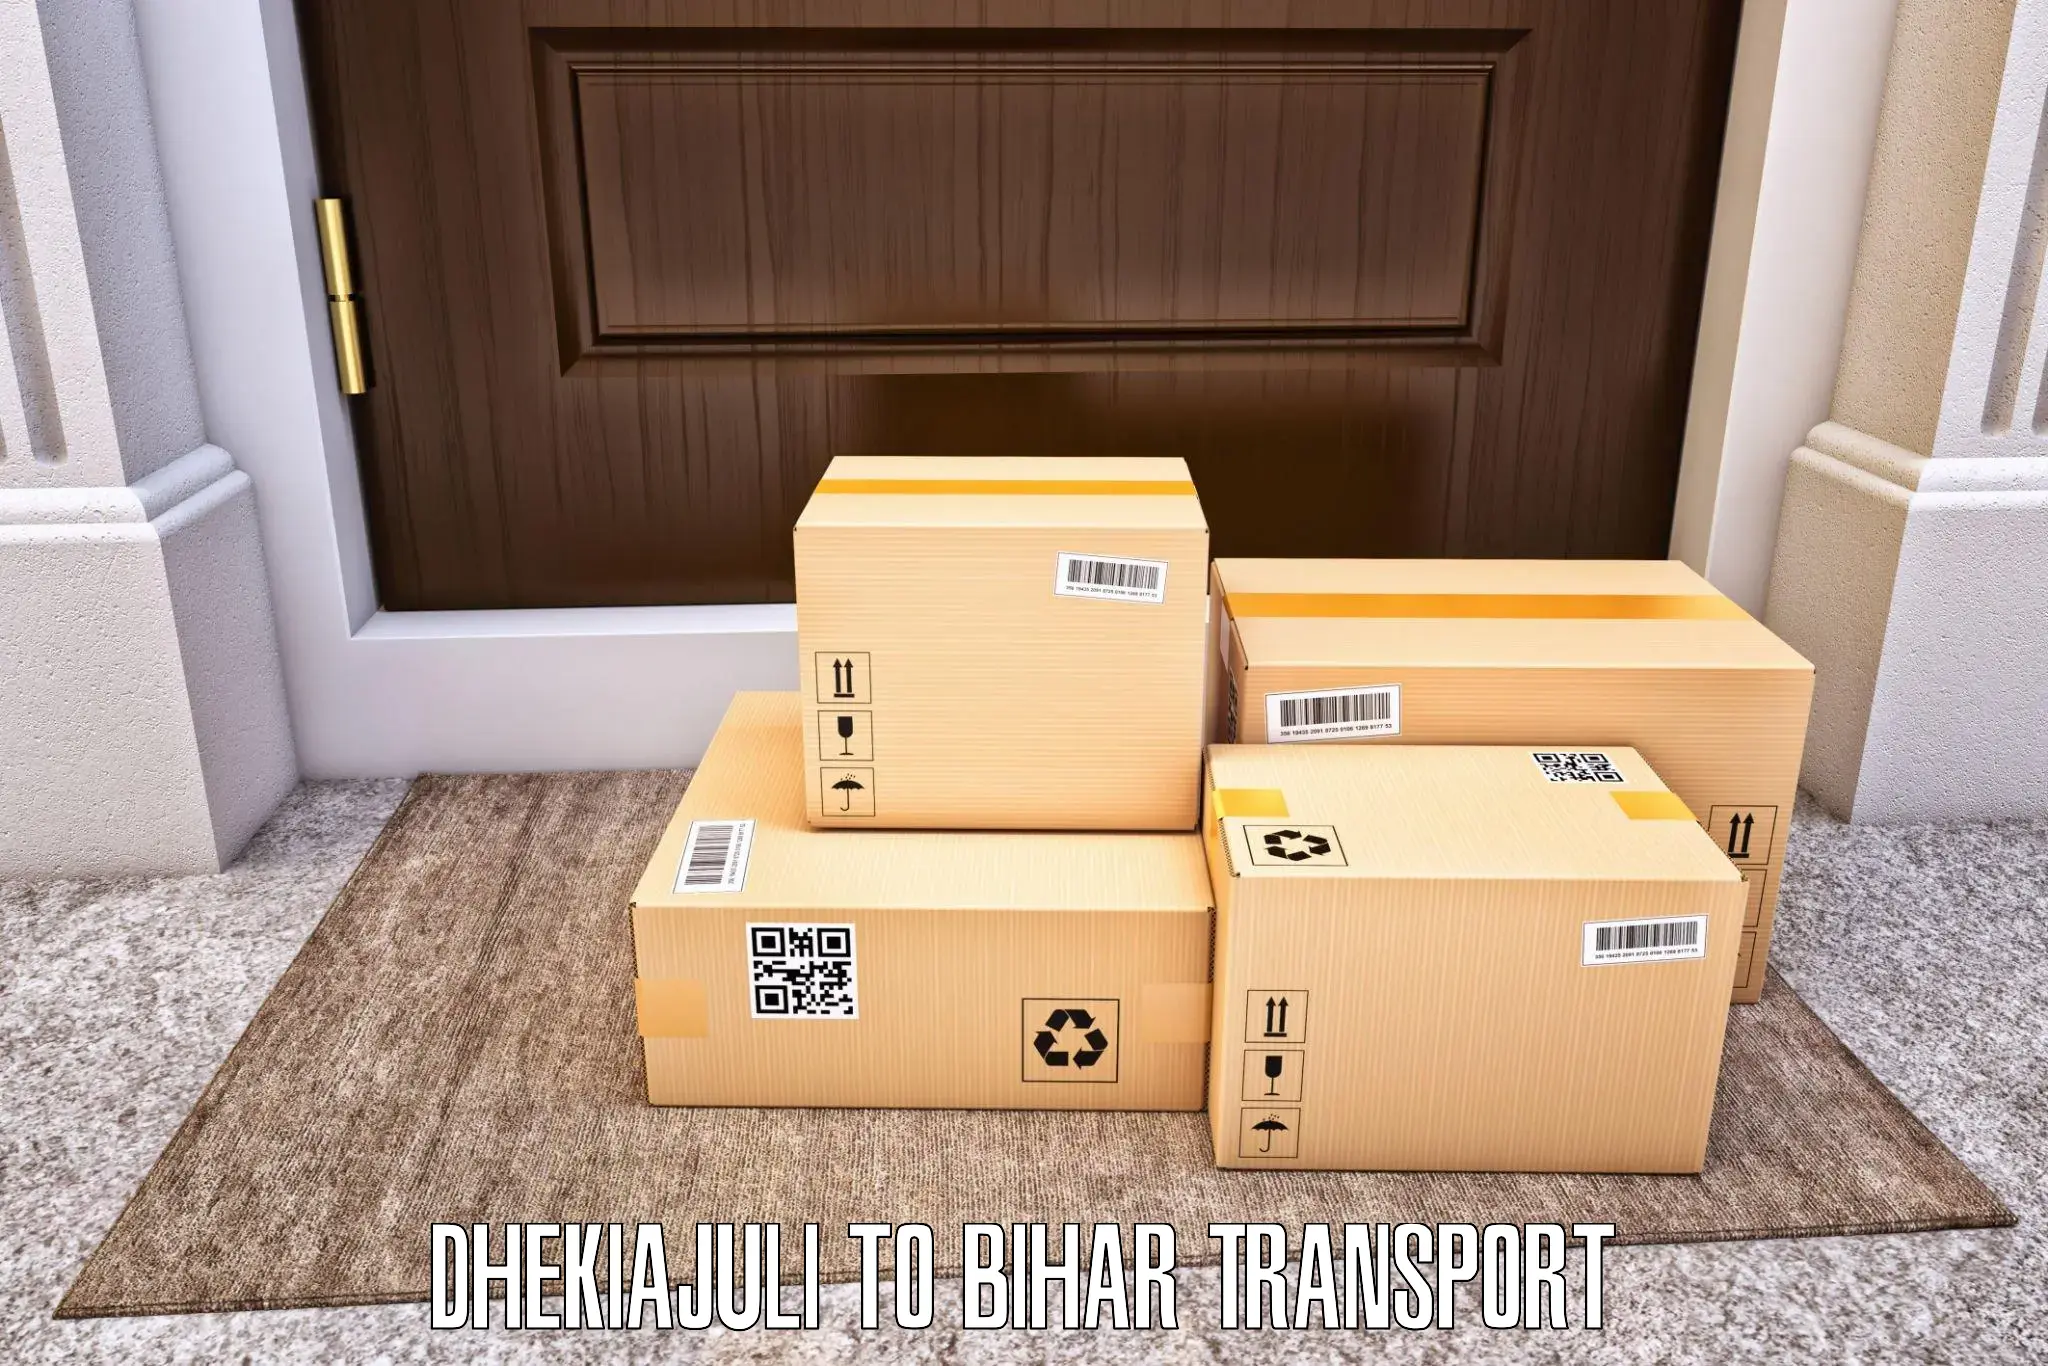 Part load transport service in India Dhekiajuli to Sheonar